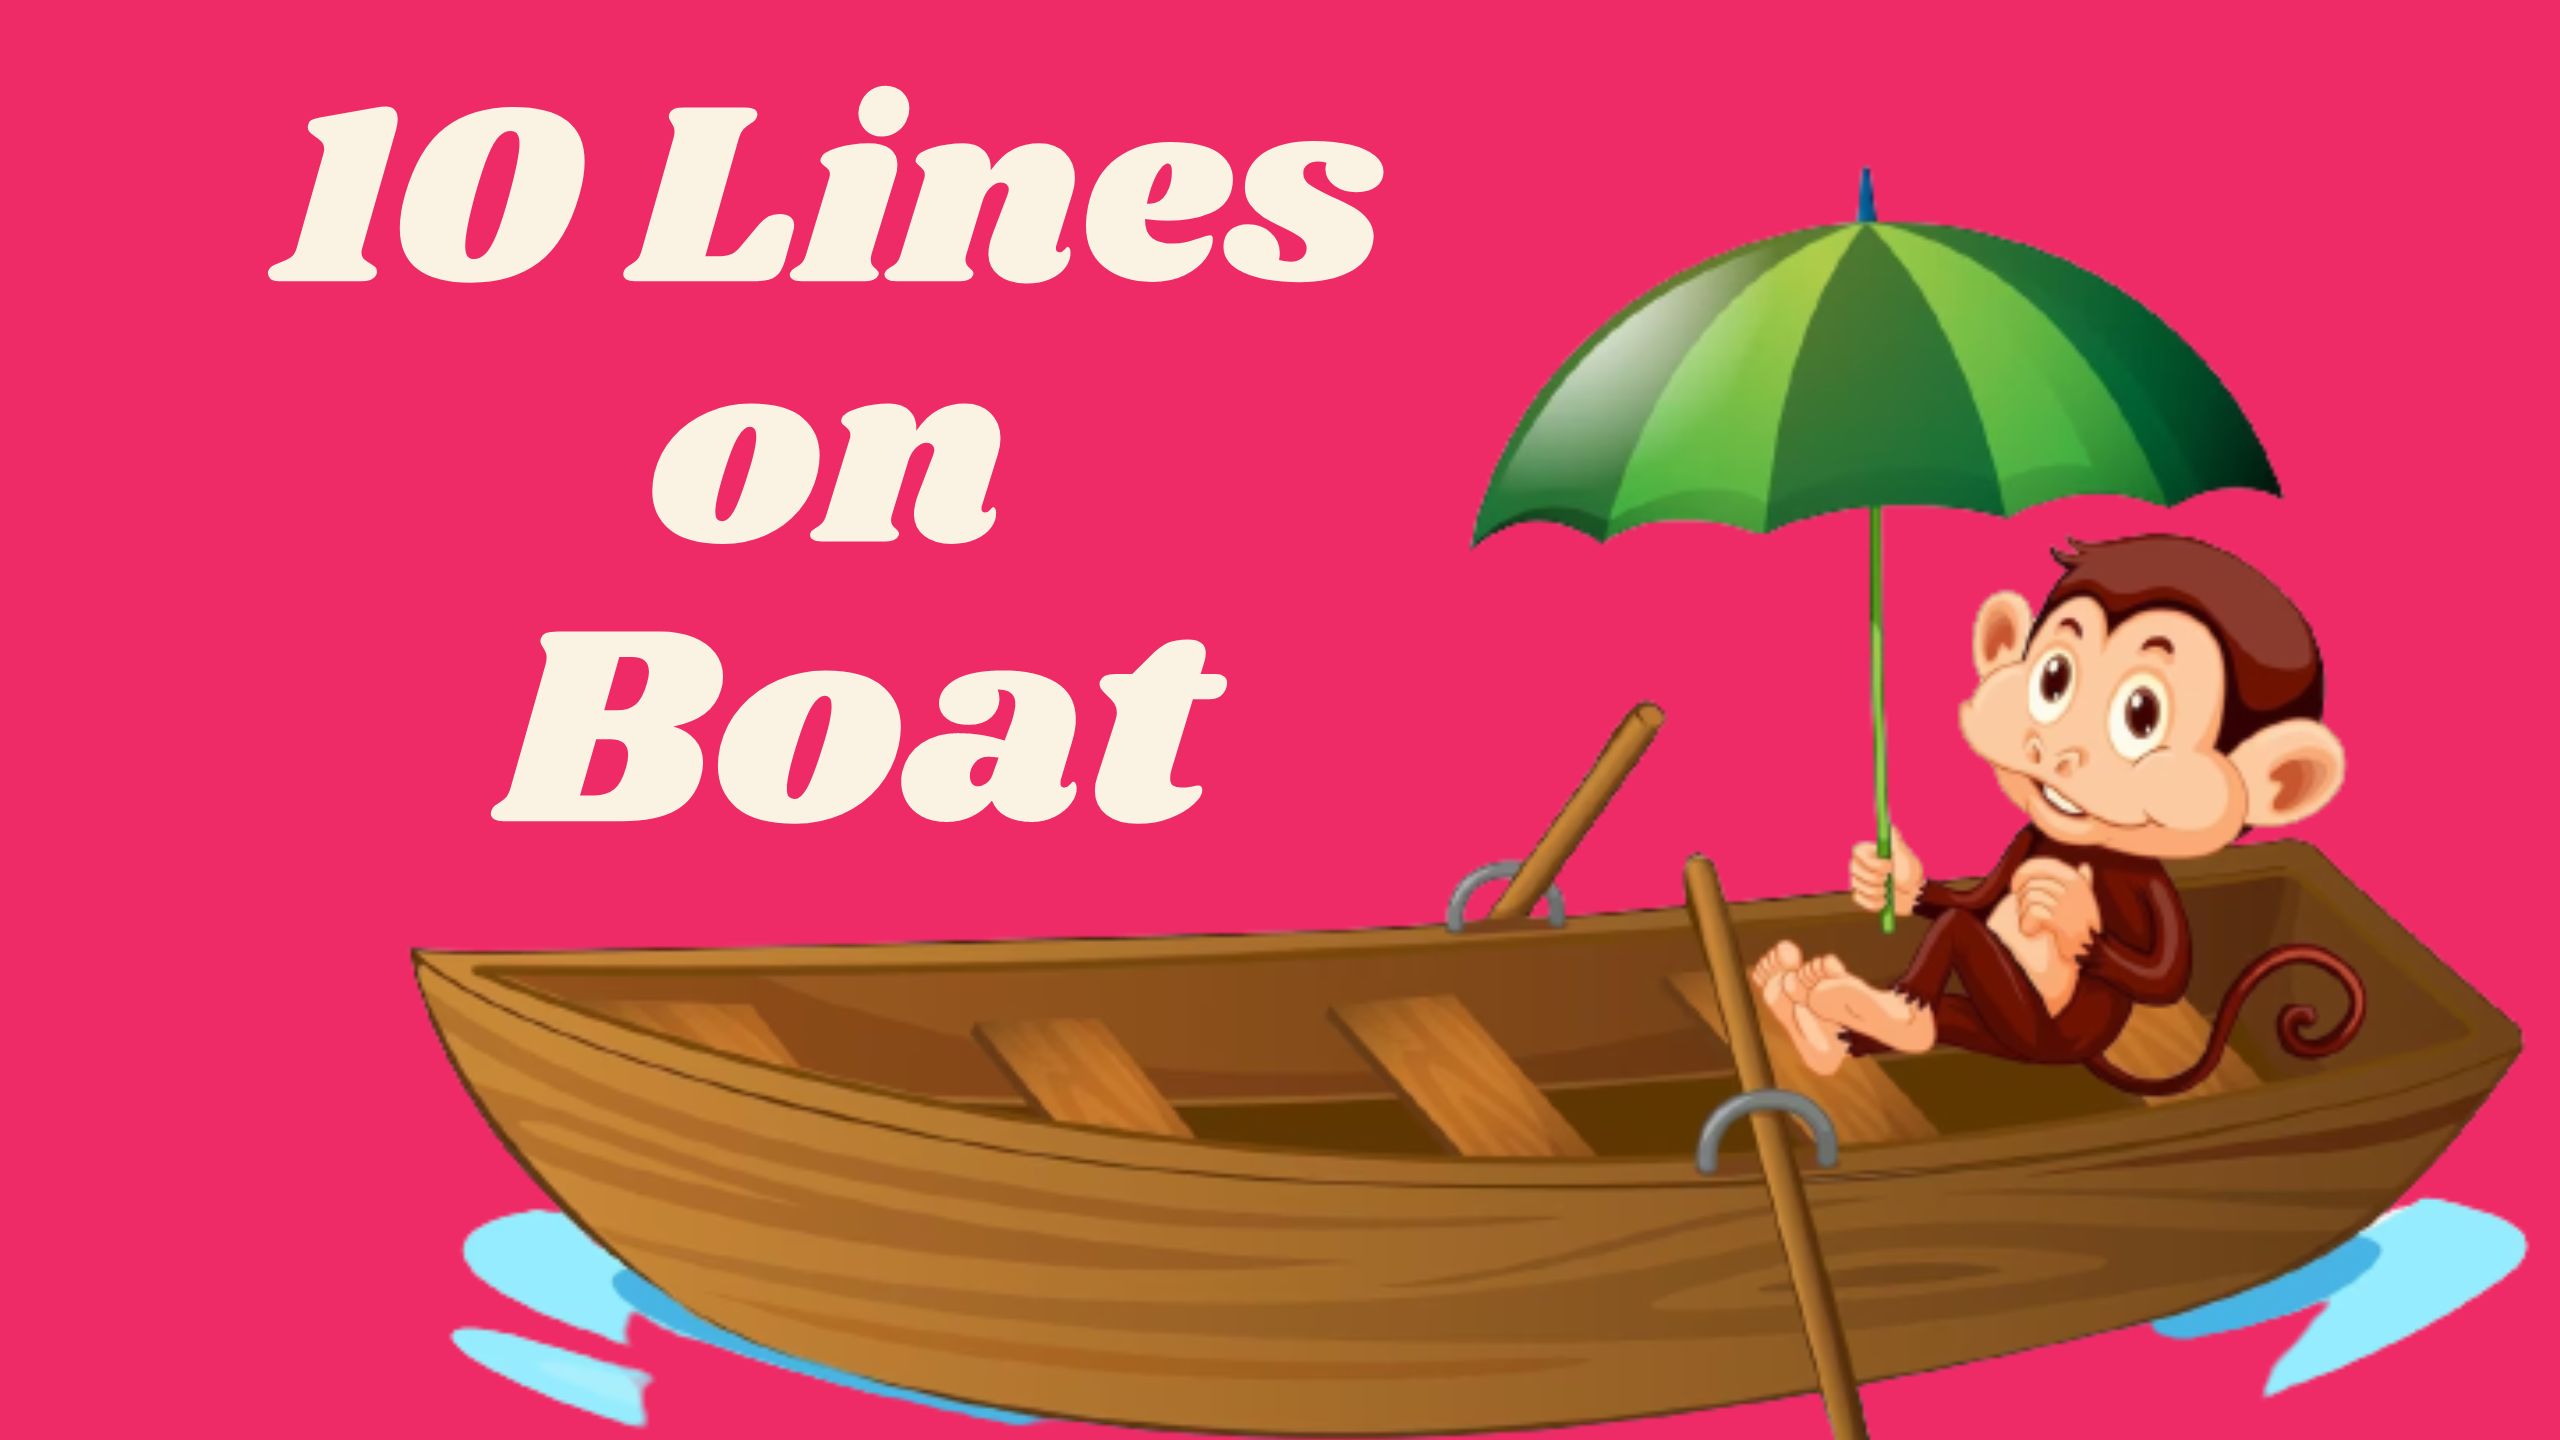 10 Lines on Boat